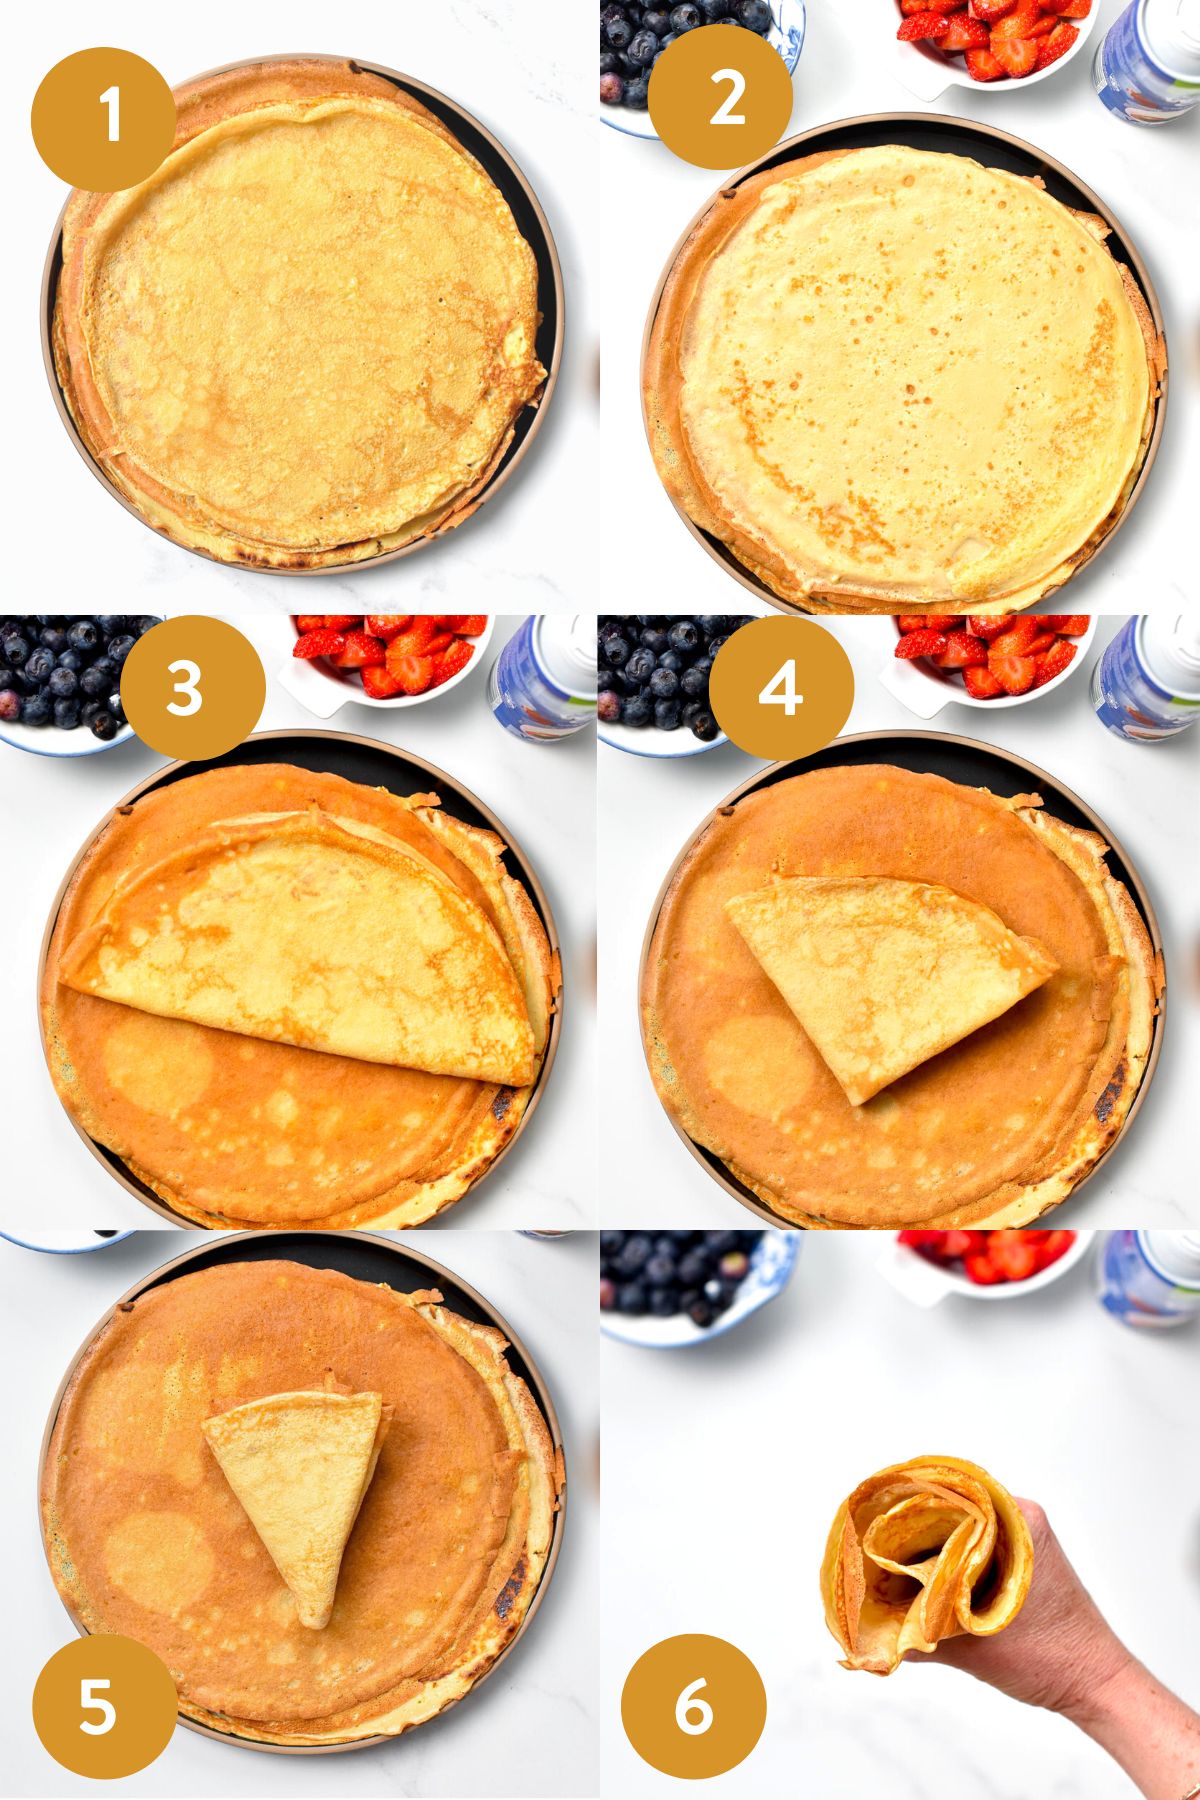 How to fold Japanese Crepes